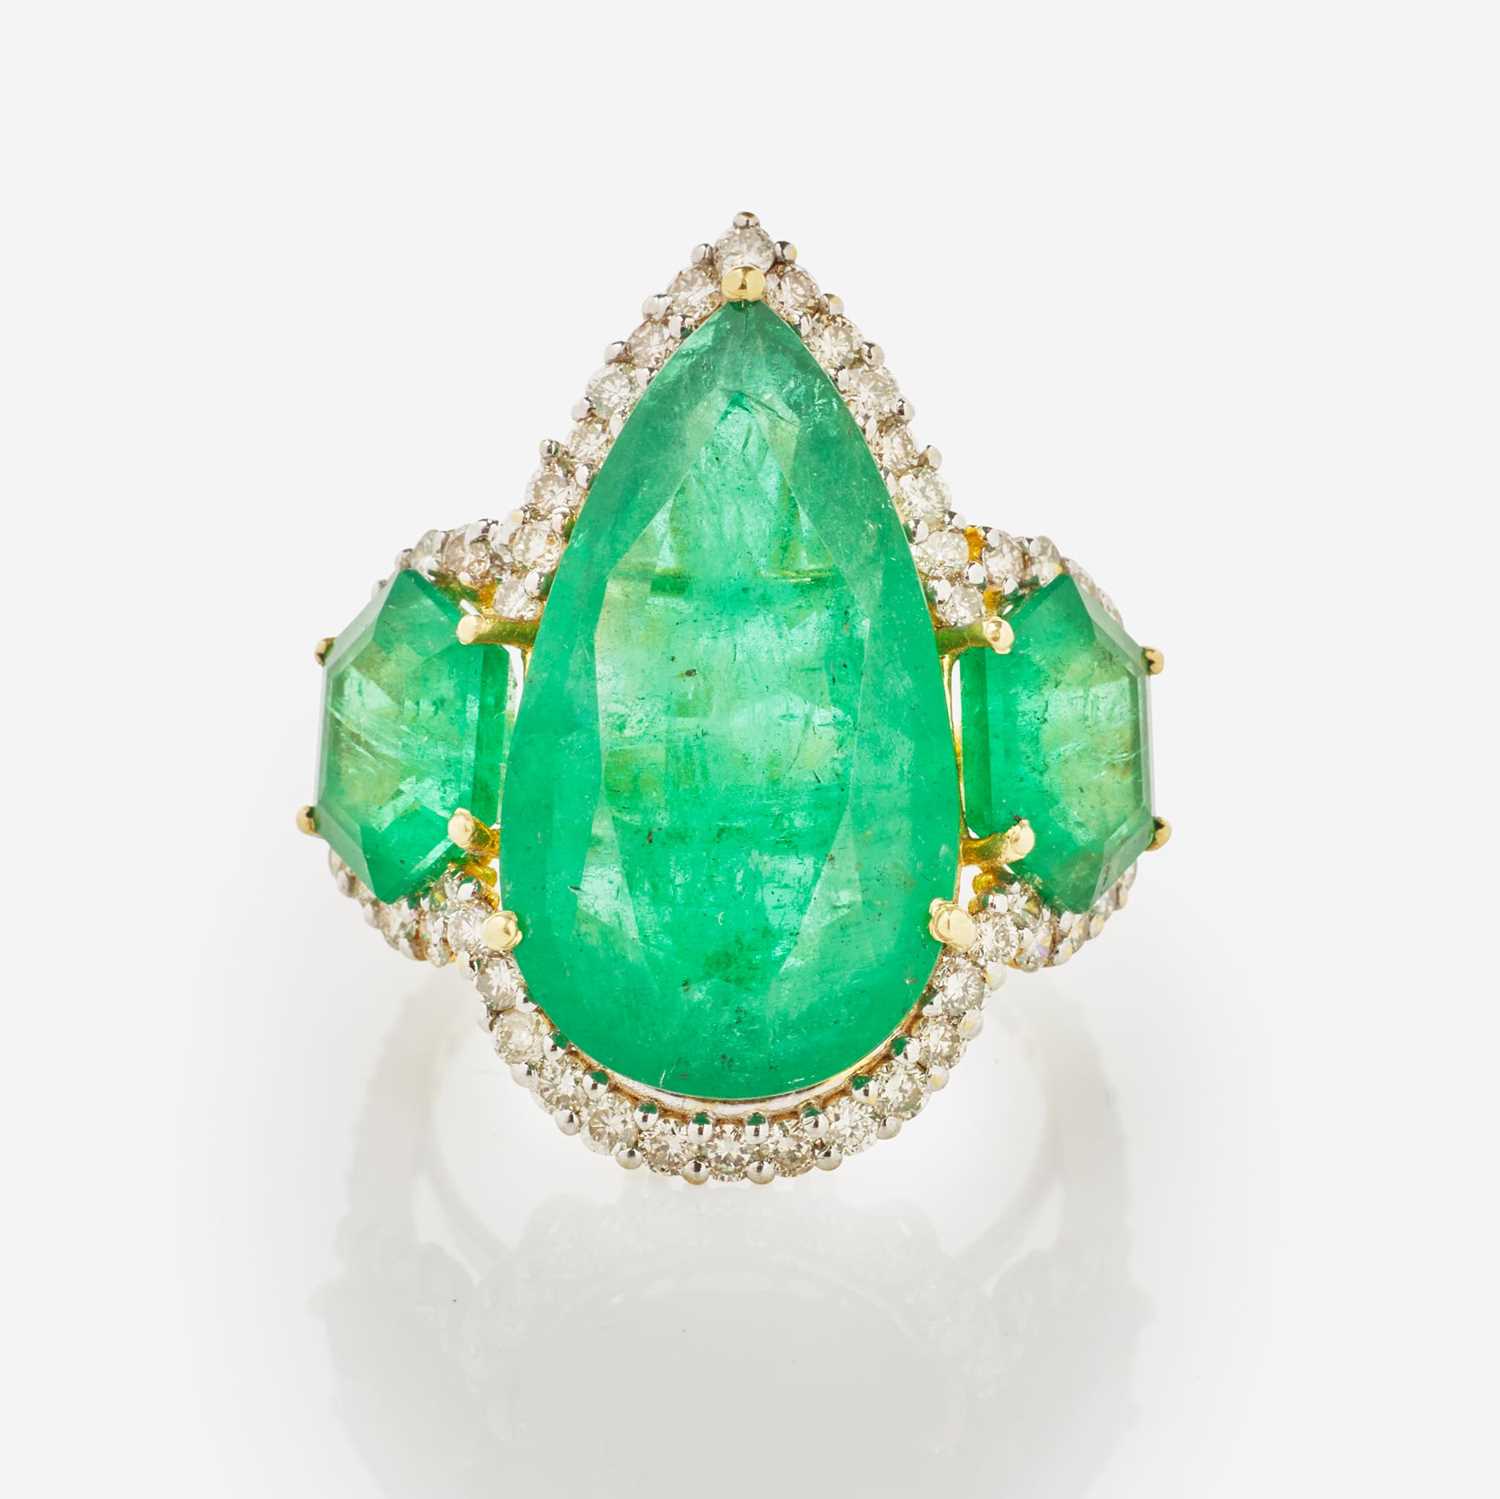 Lot 34 - An 18K Yellow Gold, Emerald, and Diamond Ring